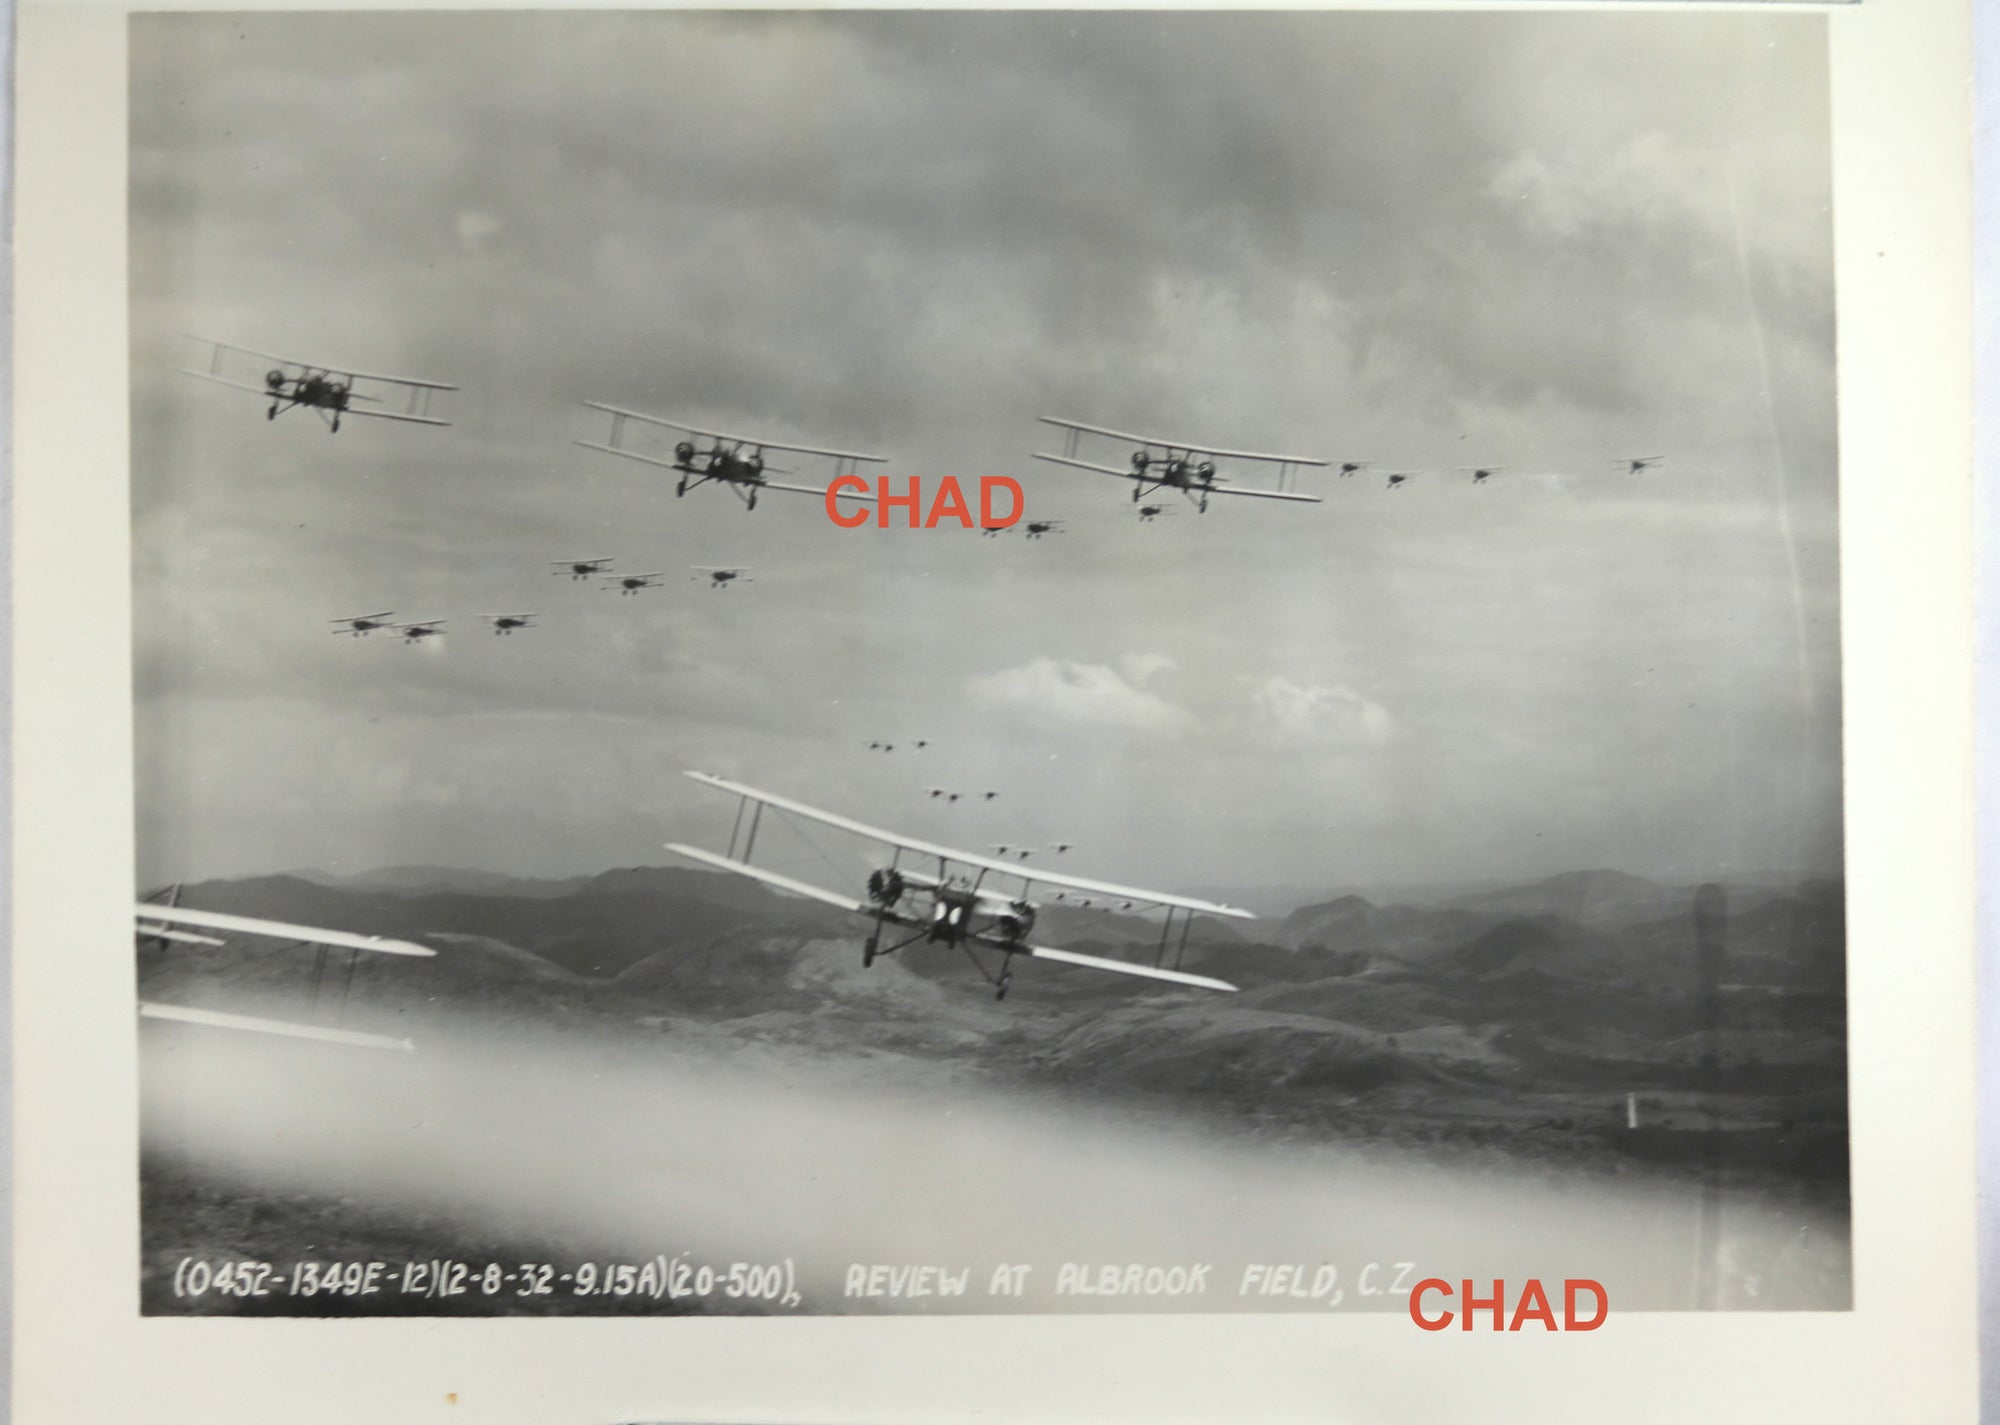 1932 photo of US biplanes flying in review, Albrook Field C.Z.